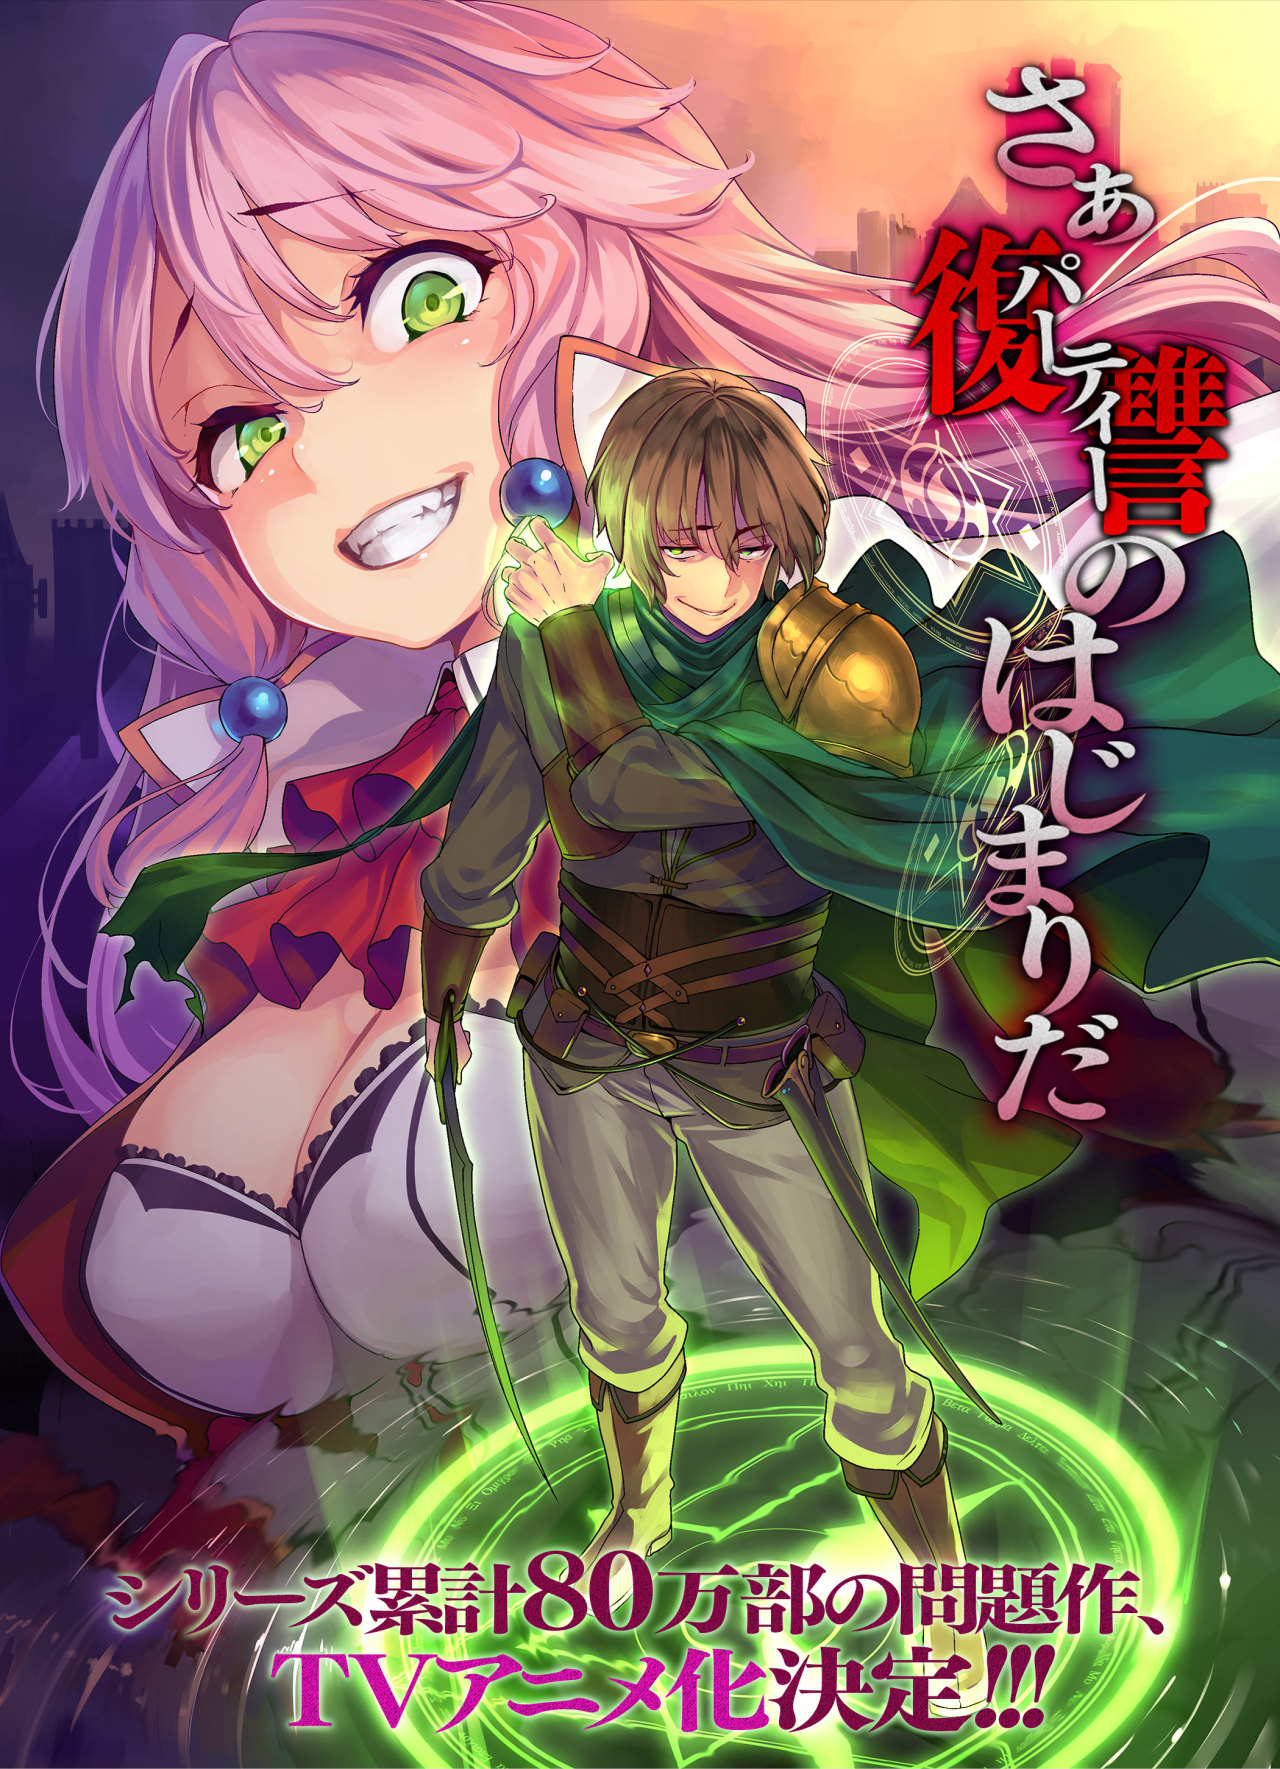 Rui Tsukiyo’s light novel series “Kaifuku Jutsushi no Yarinaoshi” (Redo of Healer) will be receiving a TV anime adaptation. It will be produced by studio TNK.
-Synopsis-“ “Keare, who was bound by this common knowledge, was exploited again and again...